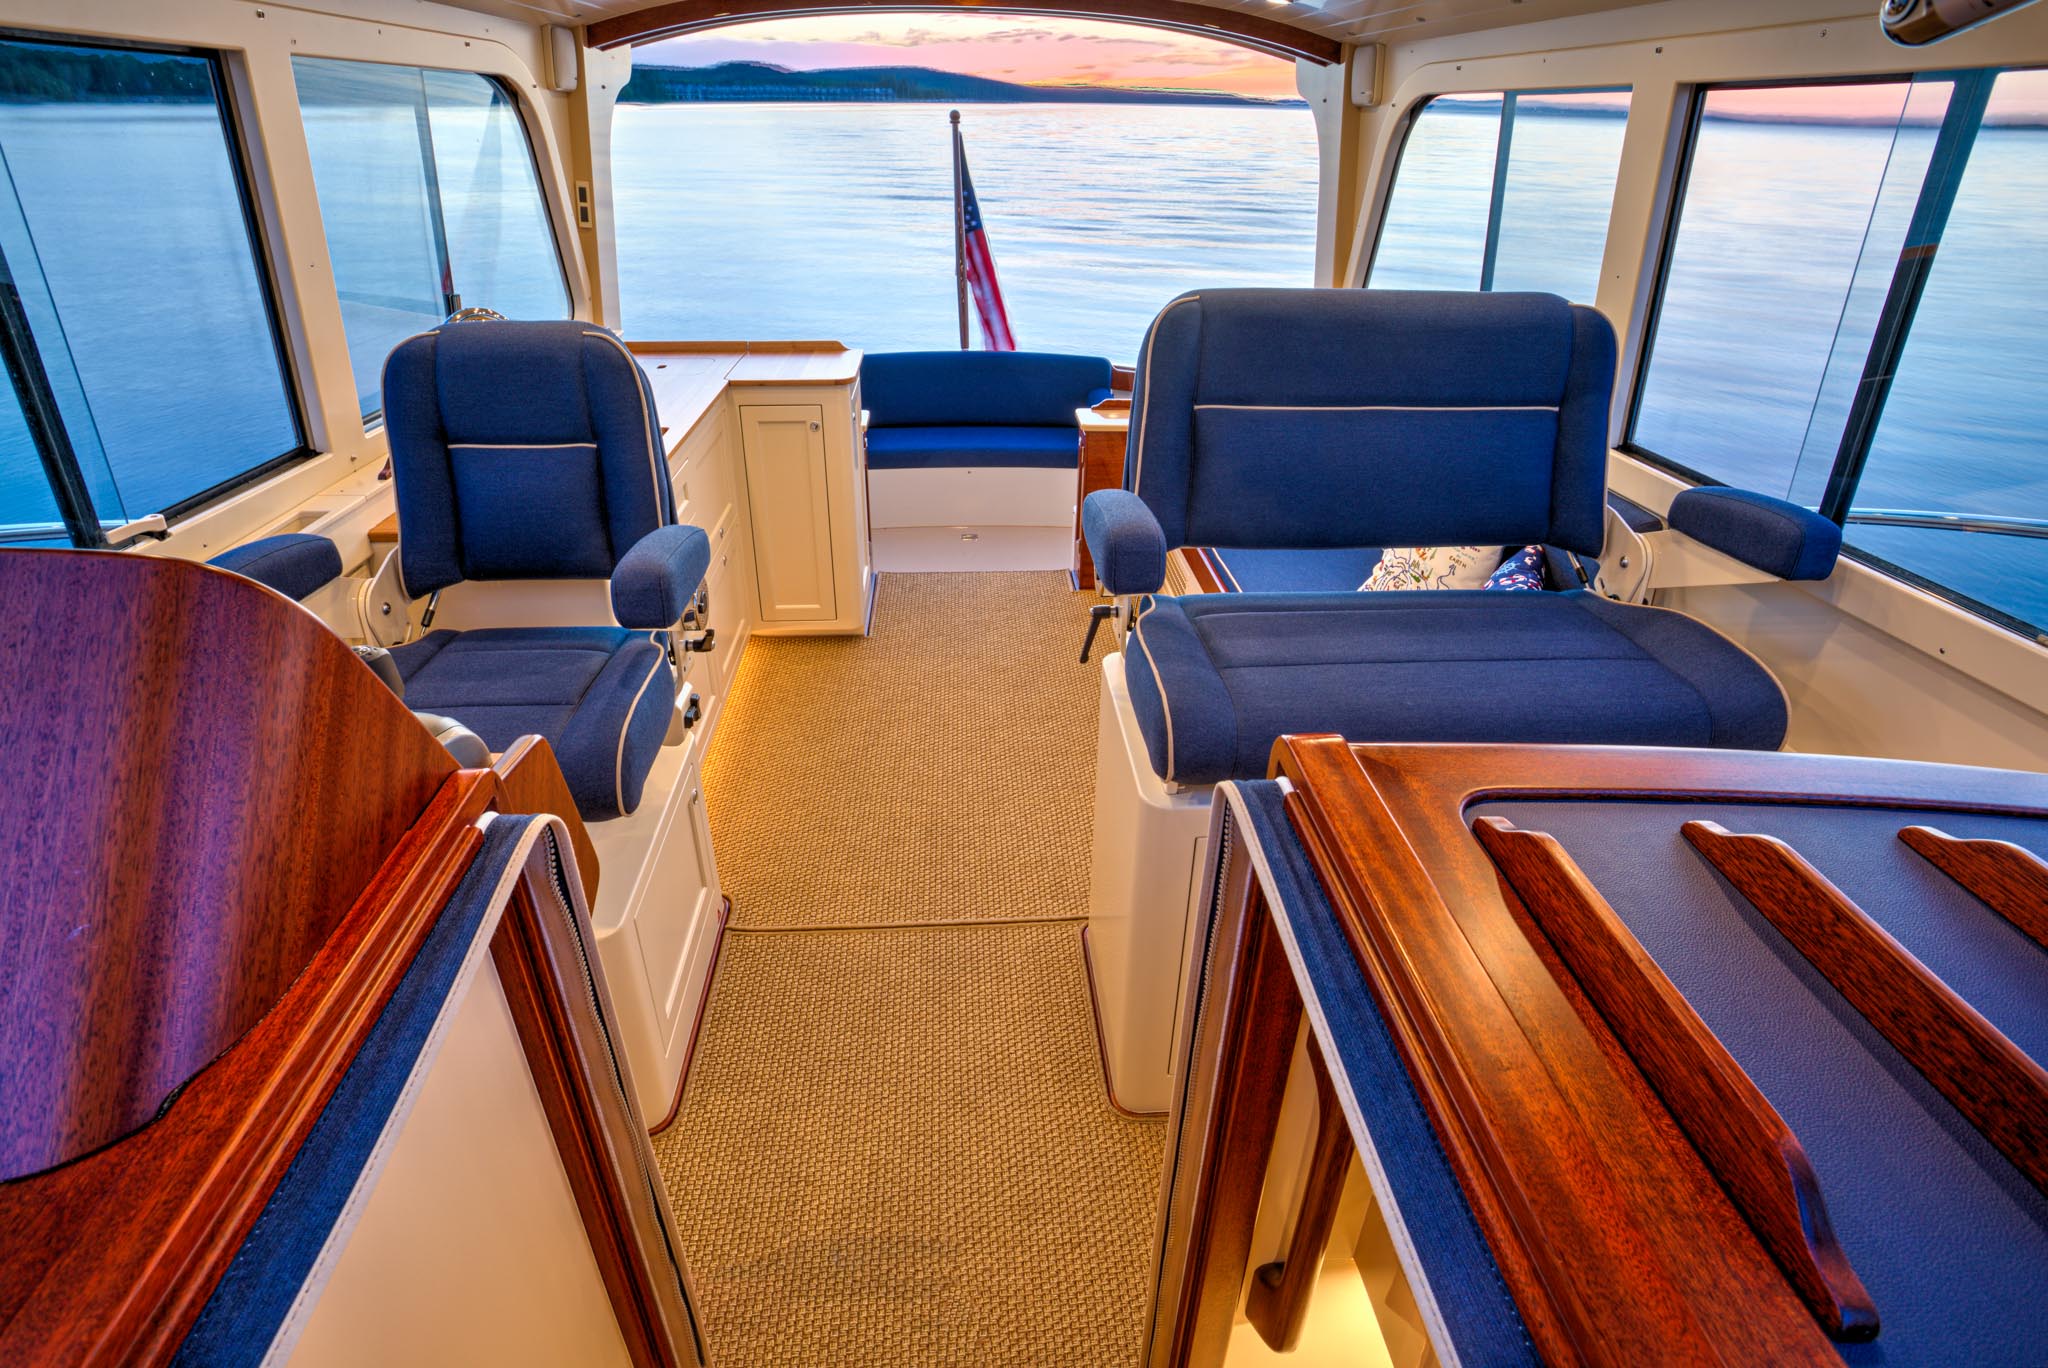 Interior view of Dreamboat, looking aft